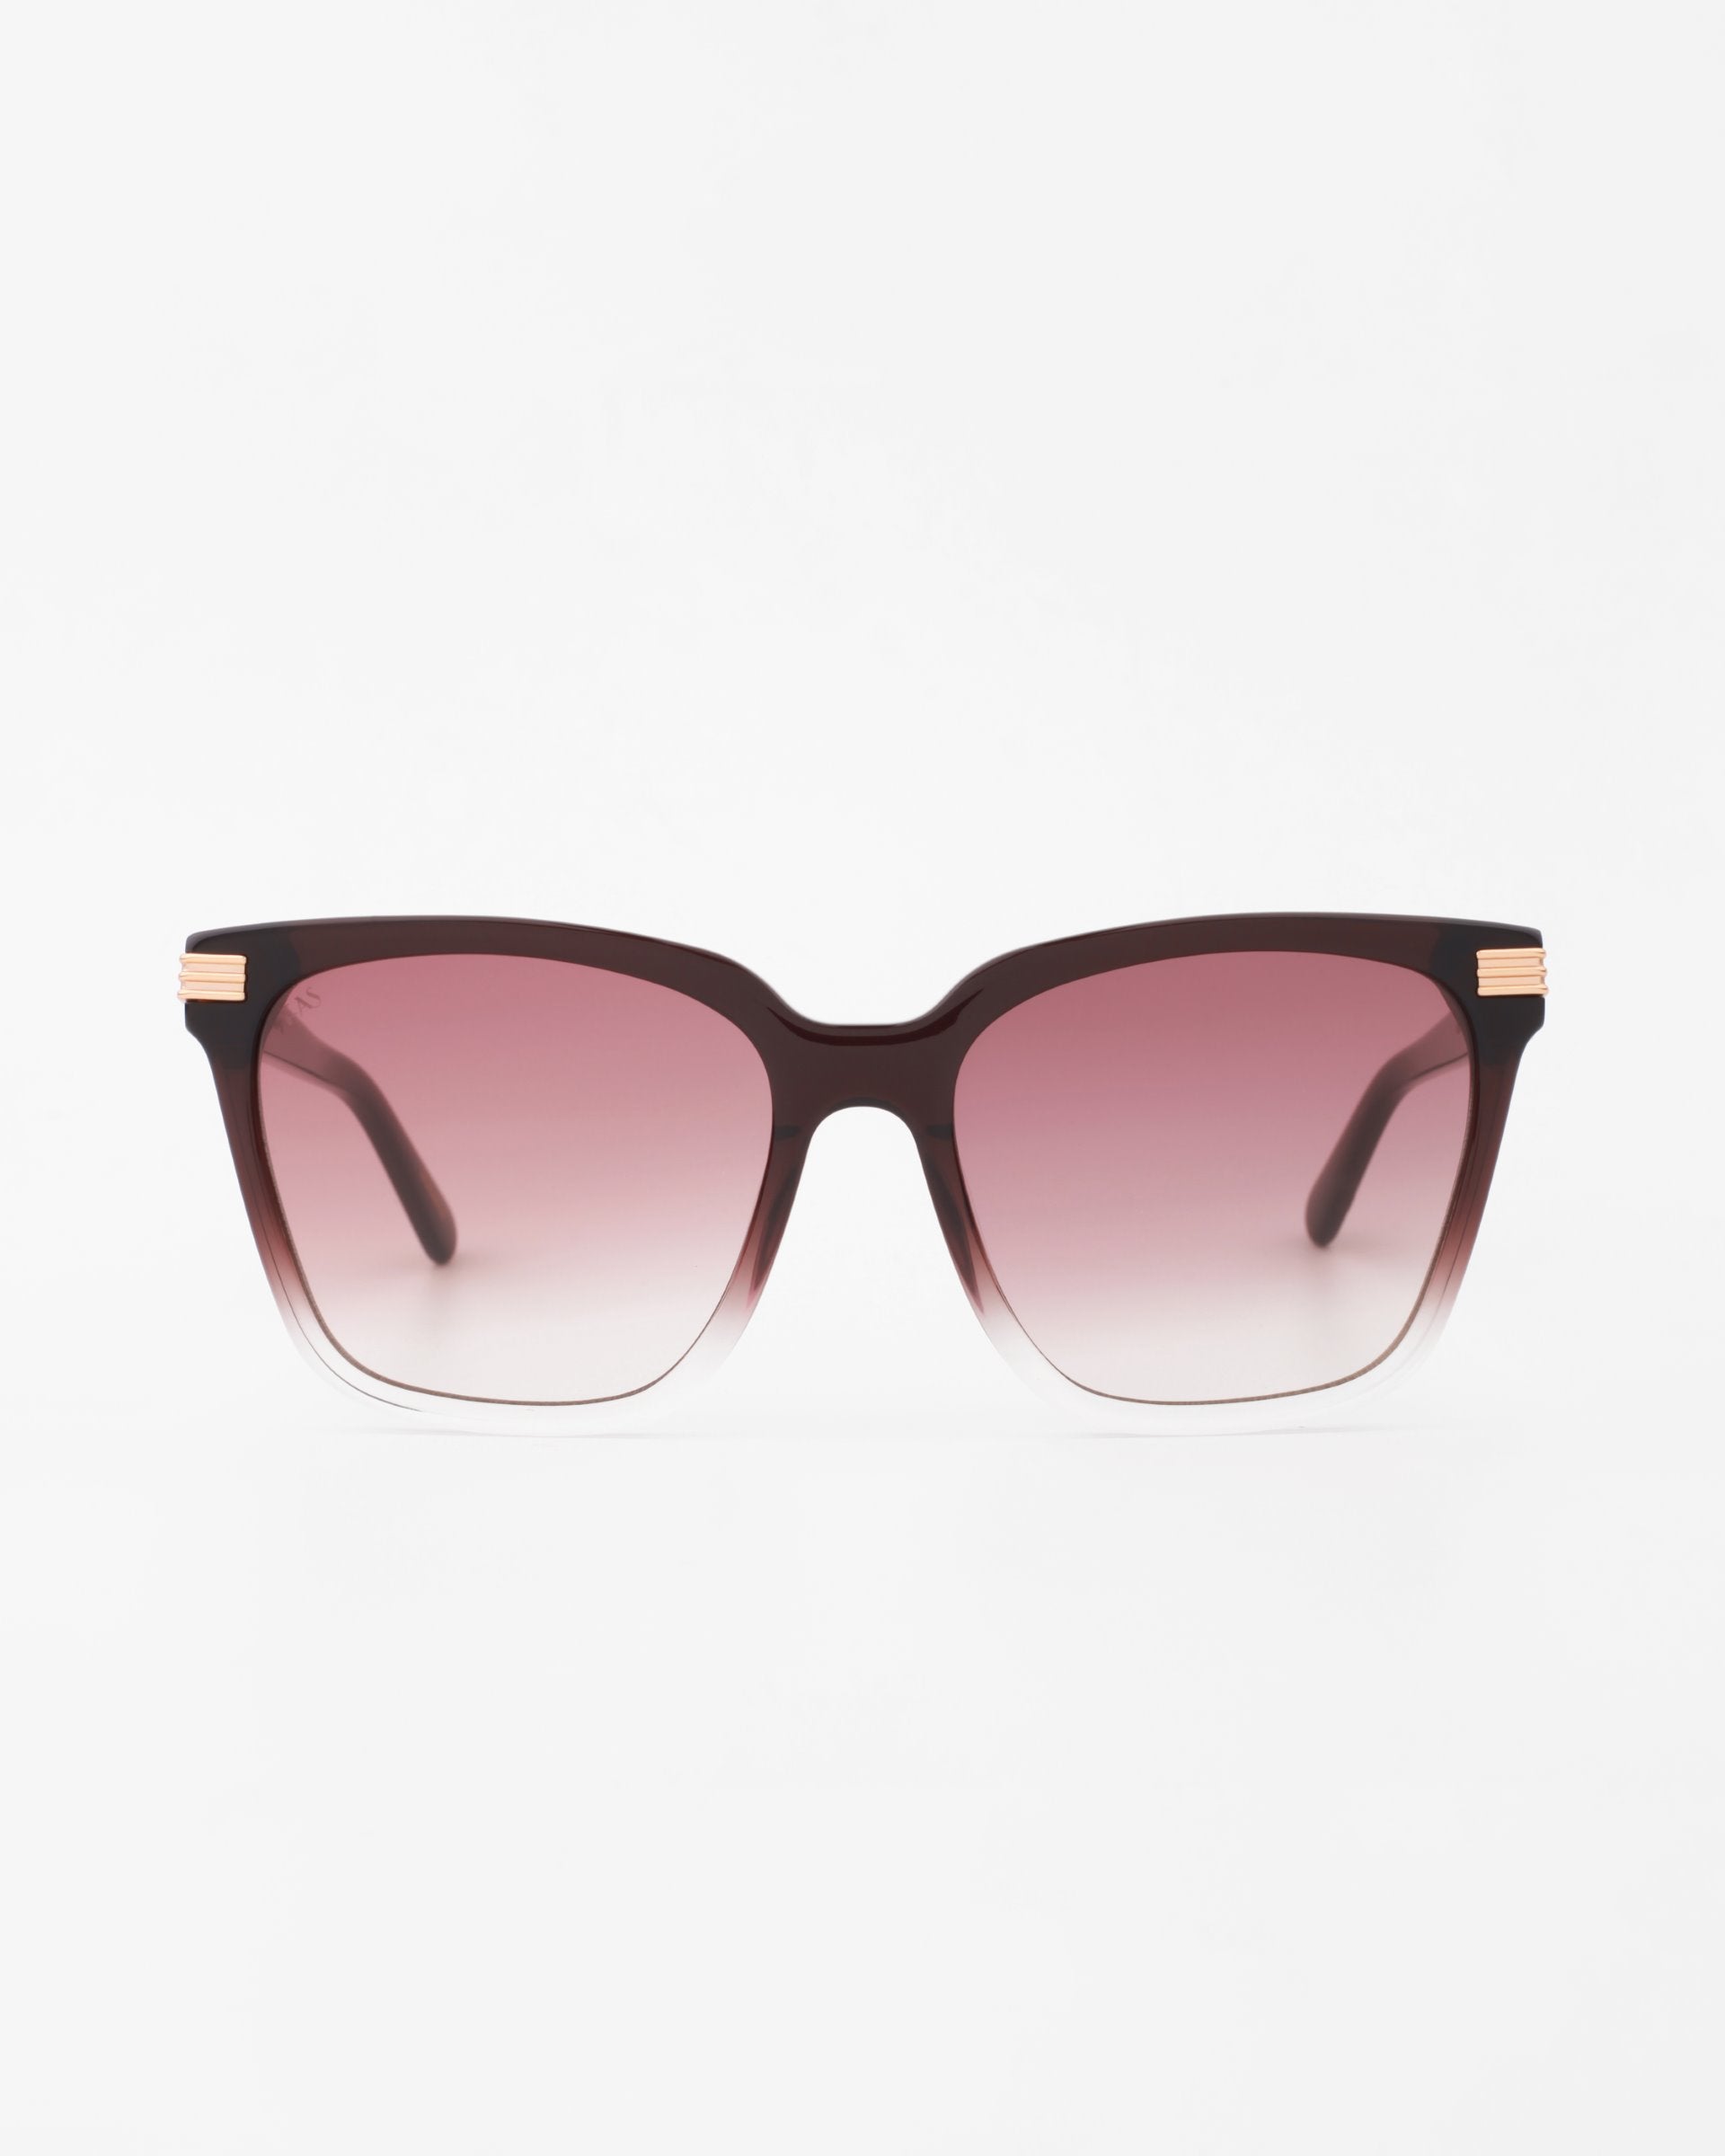 A pair of rectangular, oversized, handmade acetate sunglasses with a gradient frame that transitions from dark brown at the top to clear at the bottom. The UV-protected lenses fade from dark pink at the top to light pink at the bottom. The arms feature 18-karat gold-plated accents near the hinges. These are Gaia by For Art's Sake®.